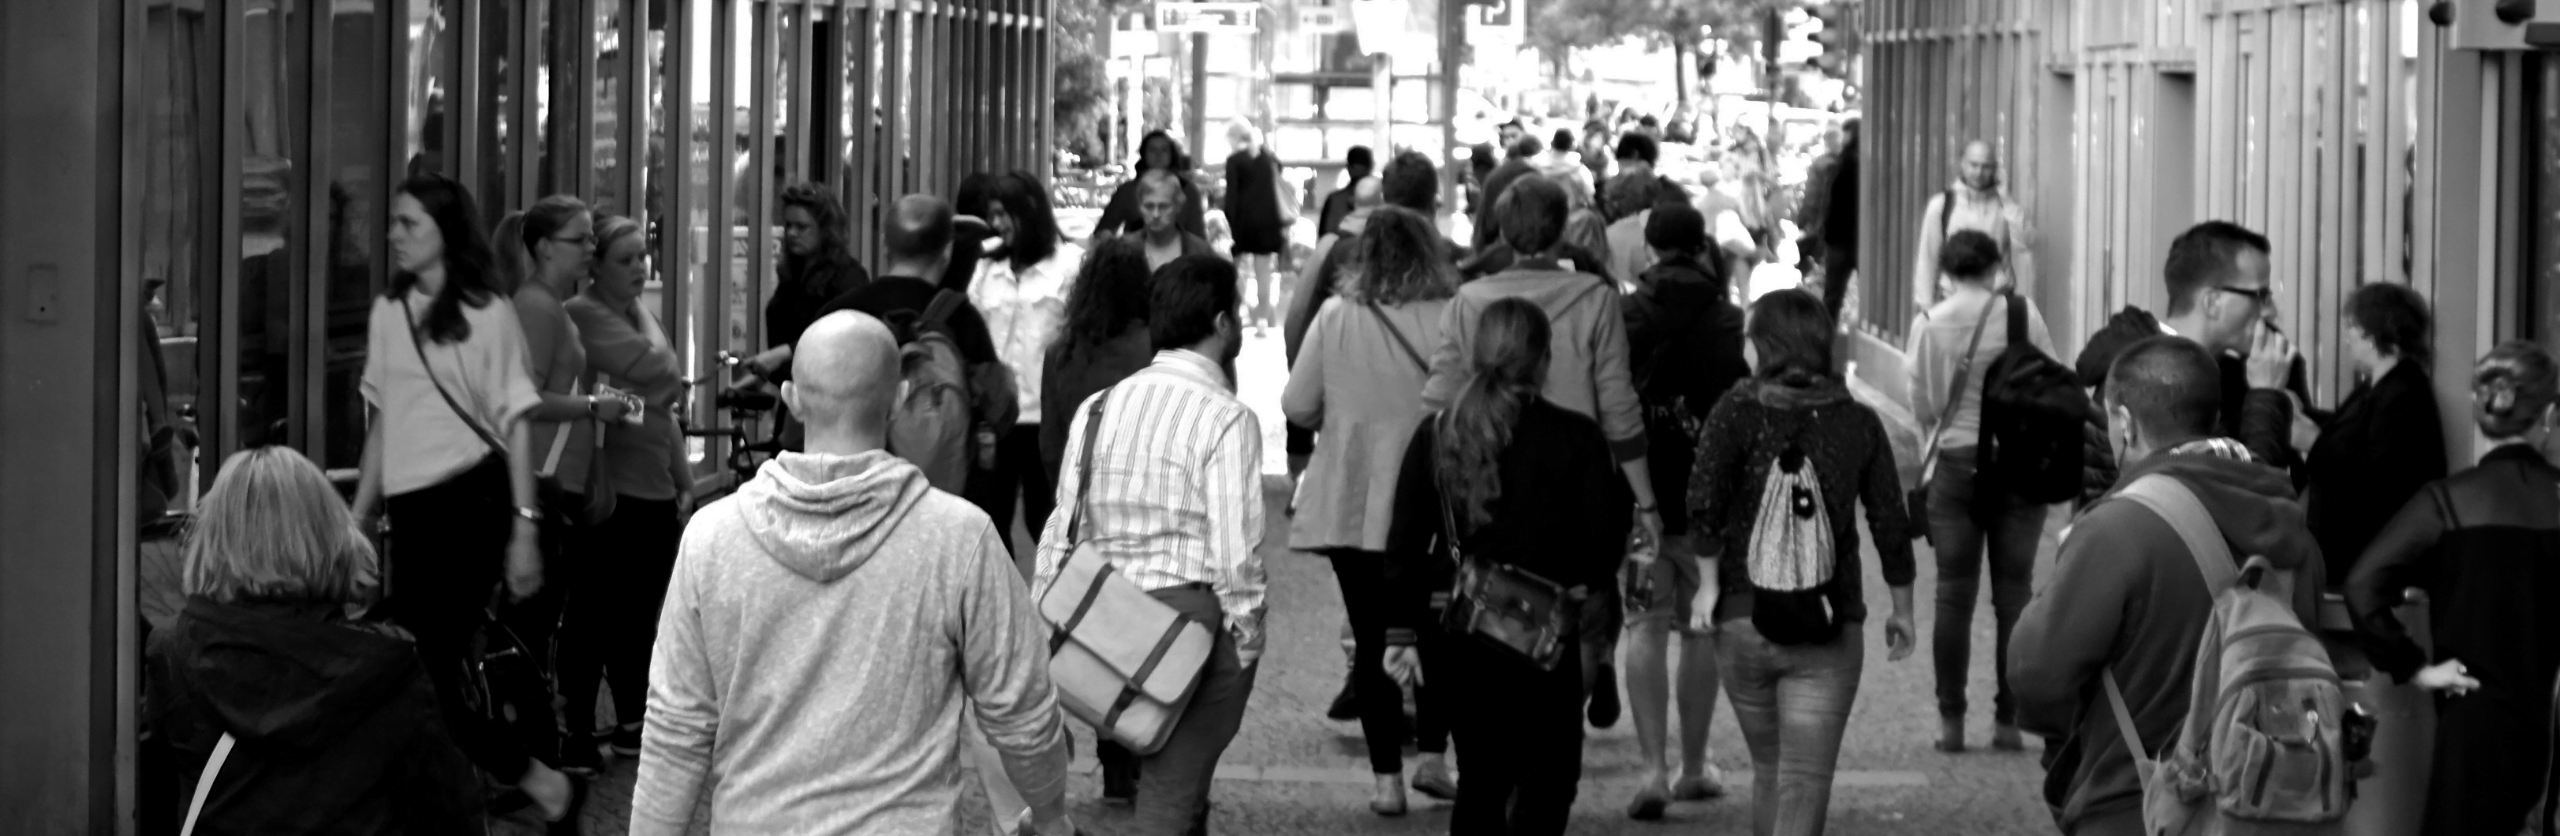 Human trafficking victims can be anywhere. Black and white photo of people walking away in a mall.